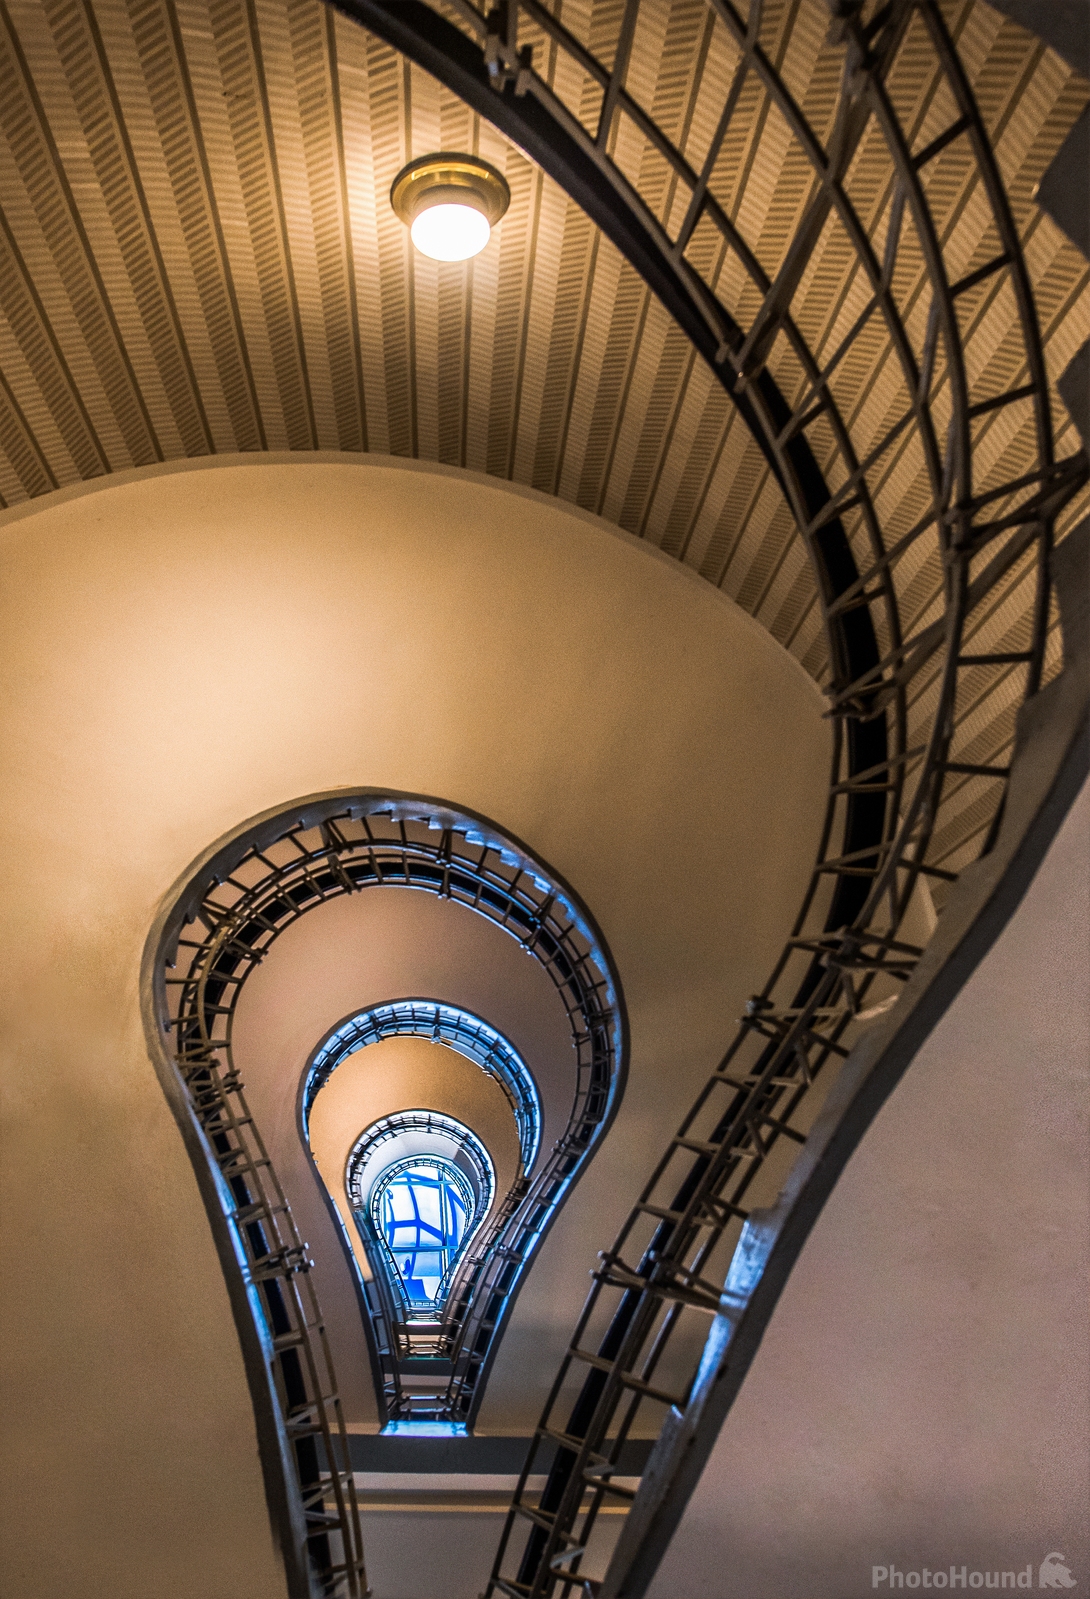 Image of The lightbulb staircase by Rana Jabeen